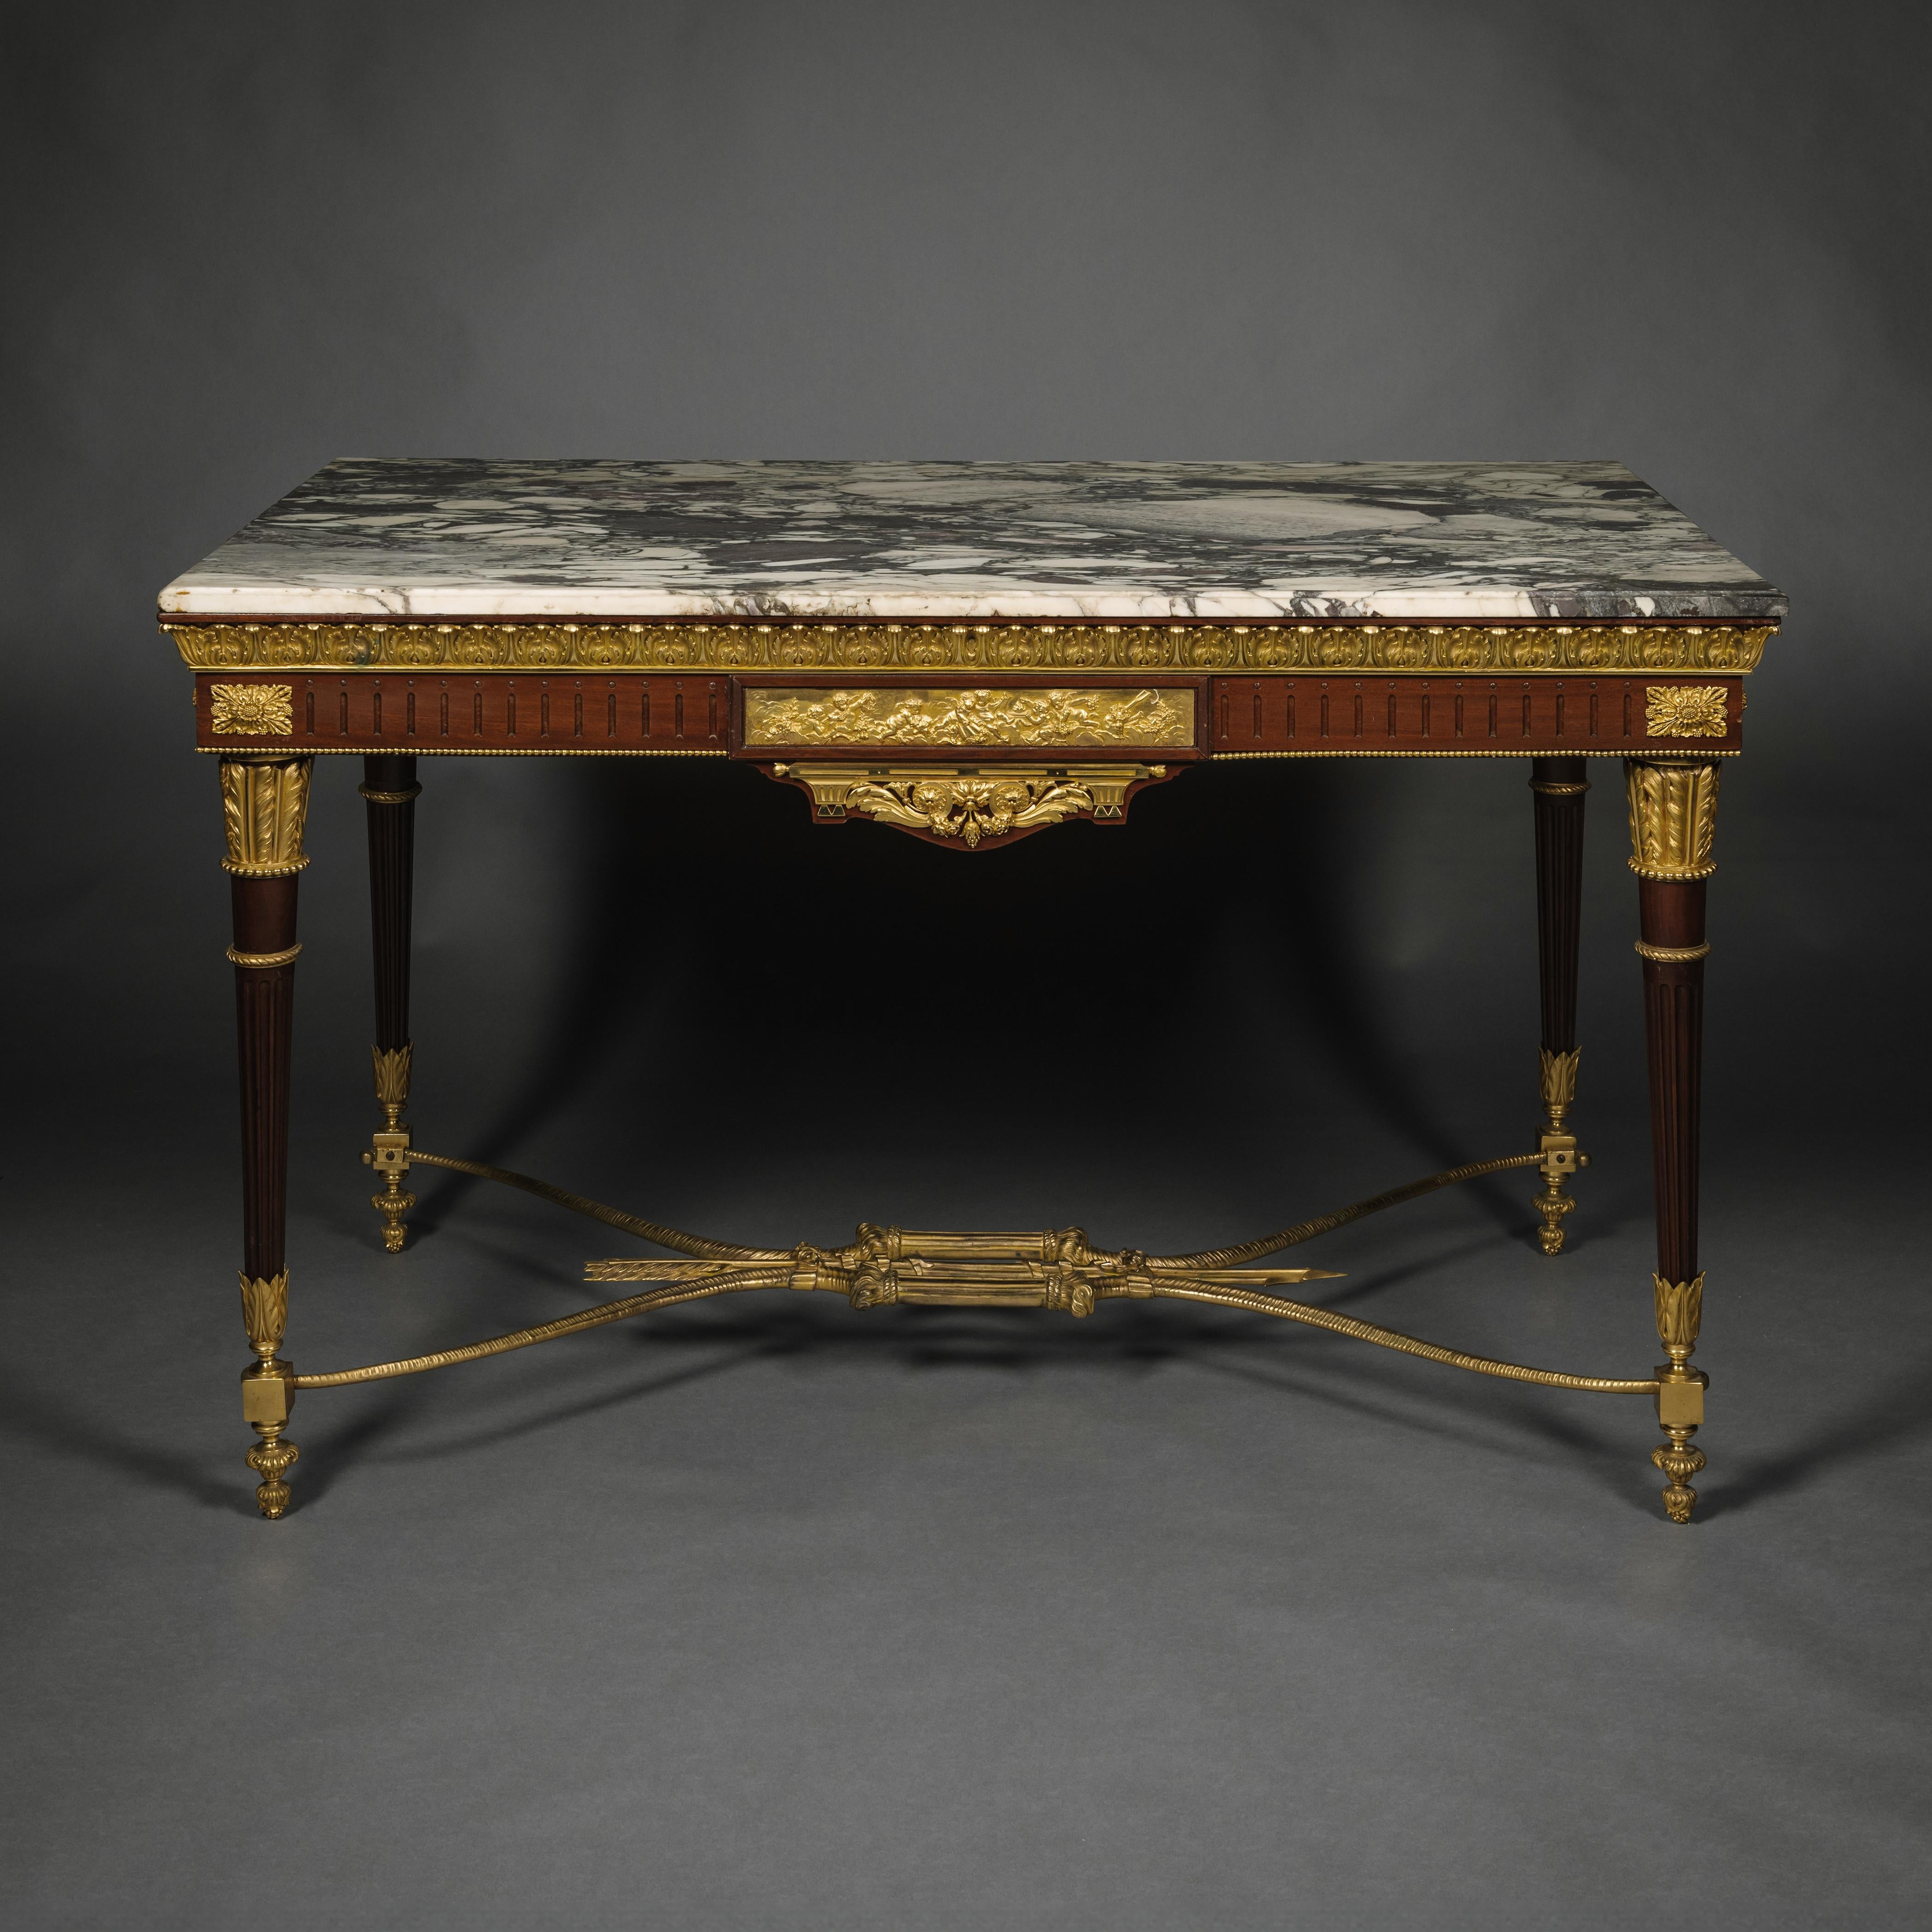 A Louis XVI Style Gilt-Bronze Mounted Mahogany Centre Table.

The table with a Villefranche de Conflent marble top of soft purple patterning against a white ground. Beneath the marble top is a stiff-leaf gilt bronze rim and the frieze is centred by